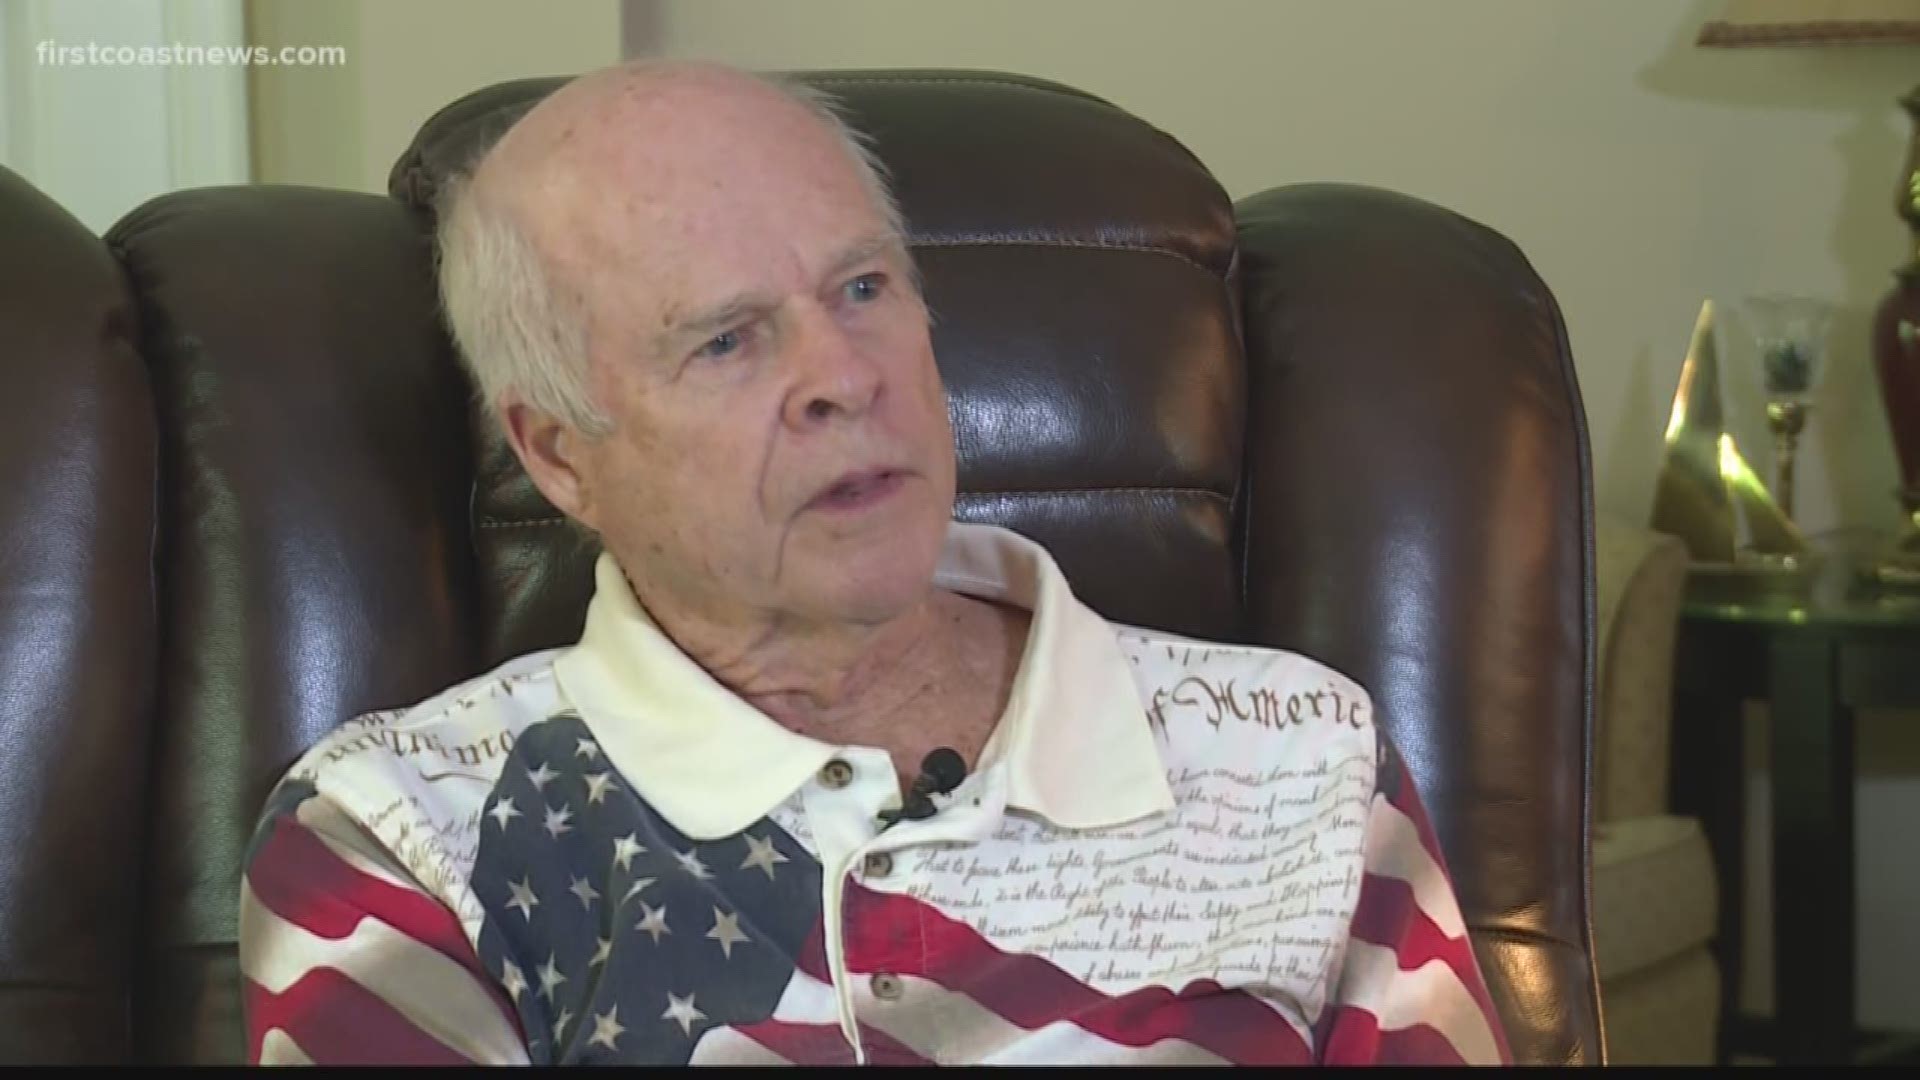 A fight began seven years ago over where the American flag can be placed on a local Air Force veteran's property.